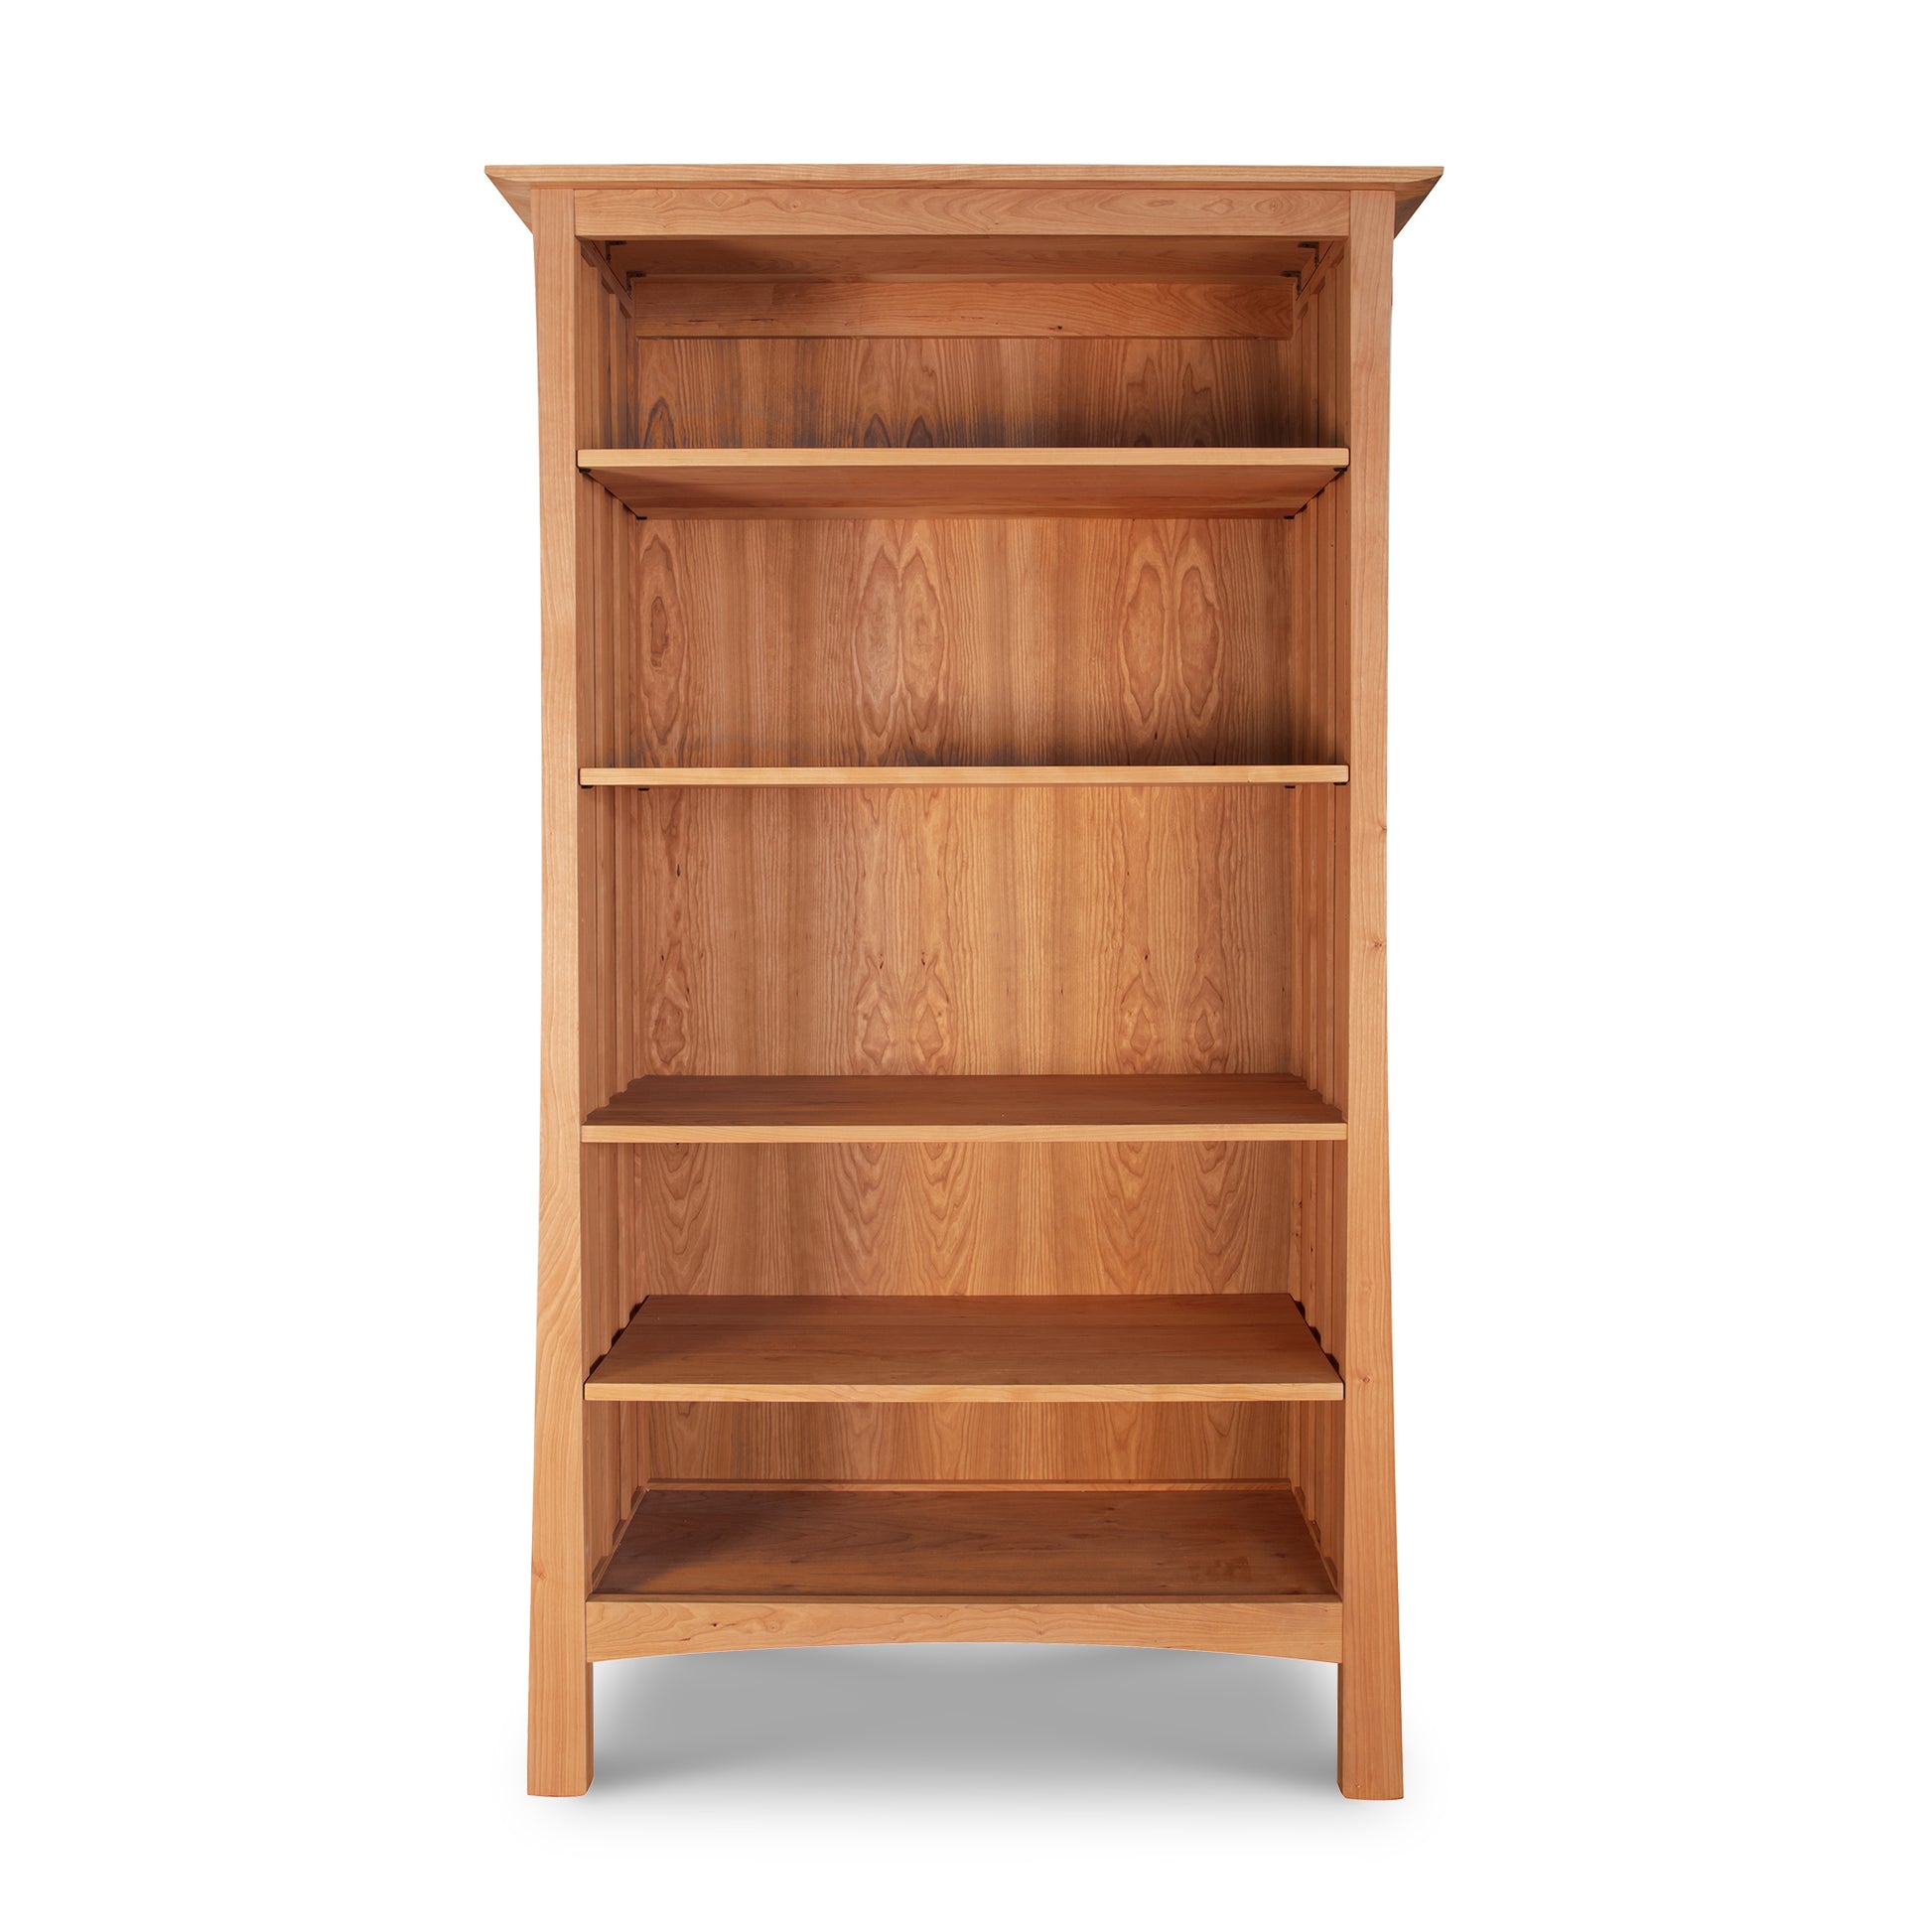 A Vermont Furniture Designs Contemporary Craftsman Custom Bookcase on a white background.